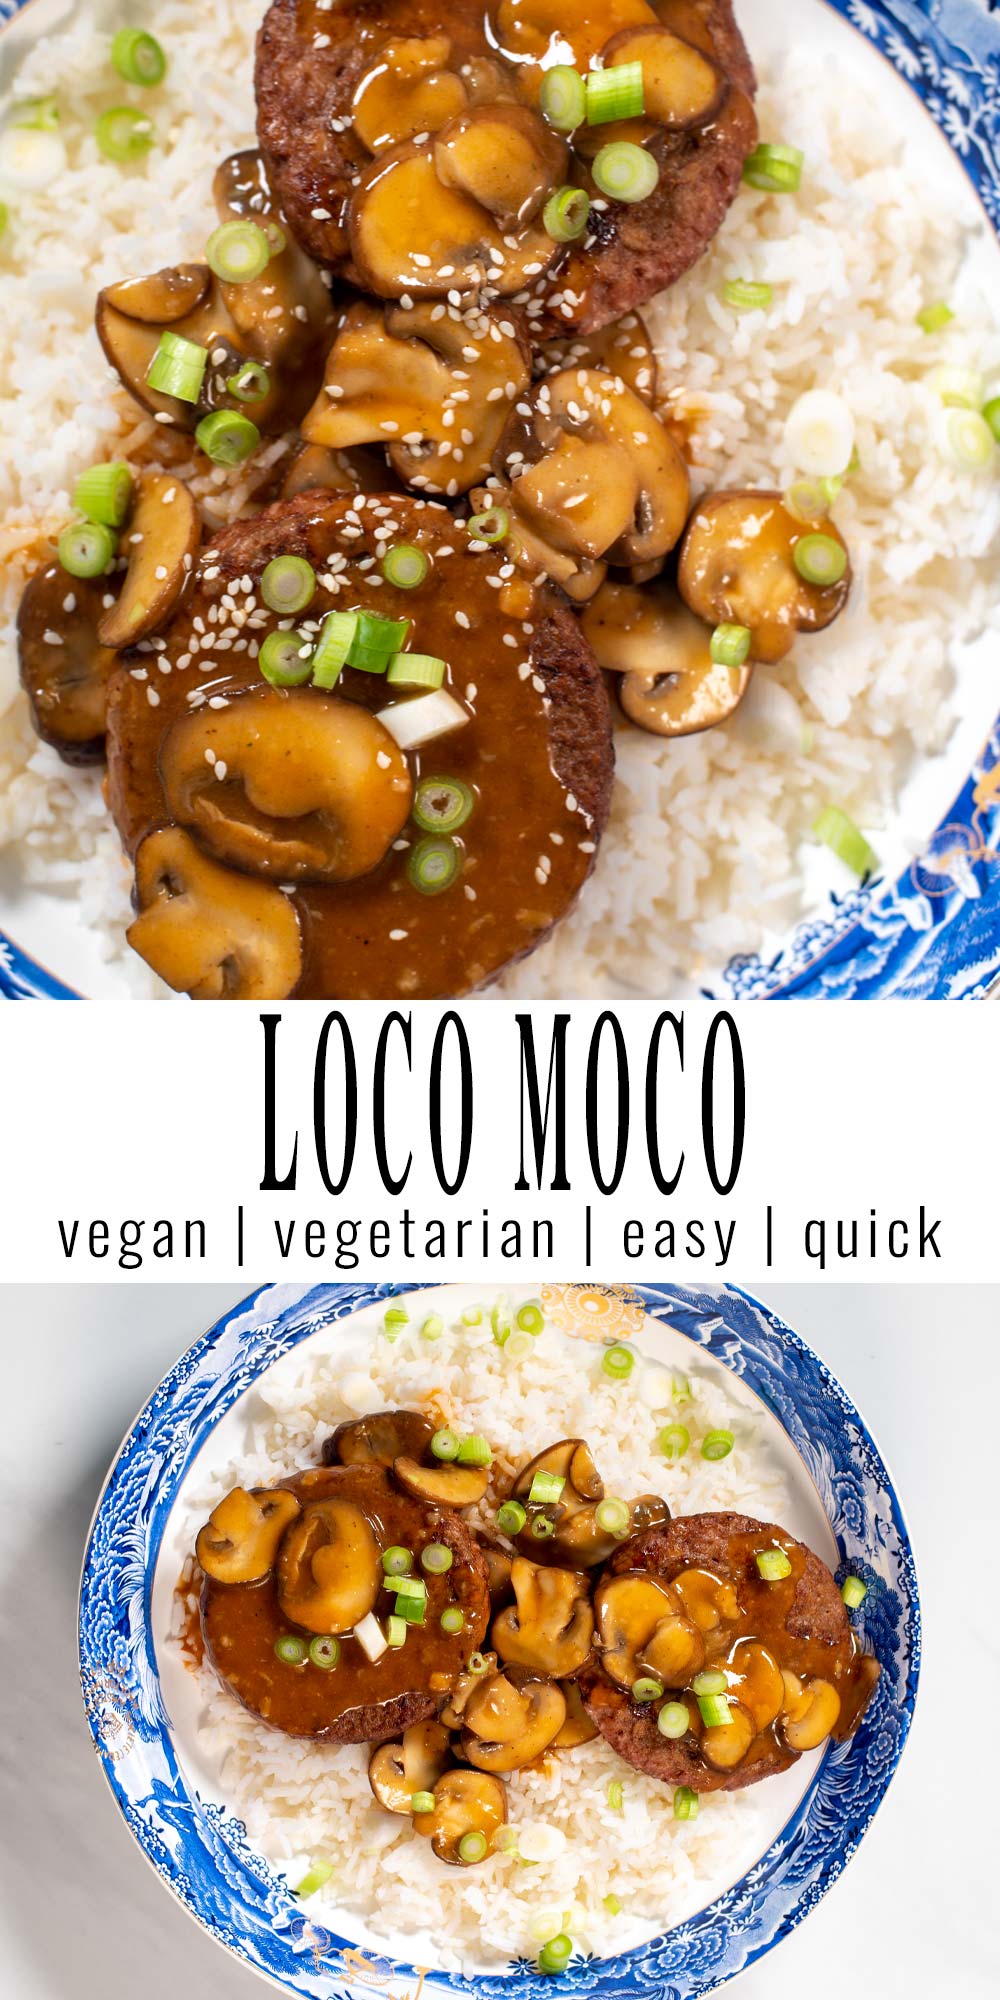 Collage of two photos showing Loco Moco with recipe title text.